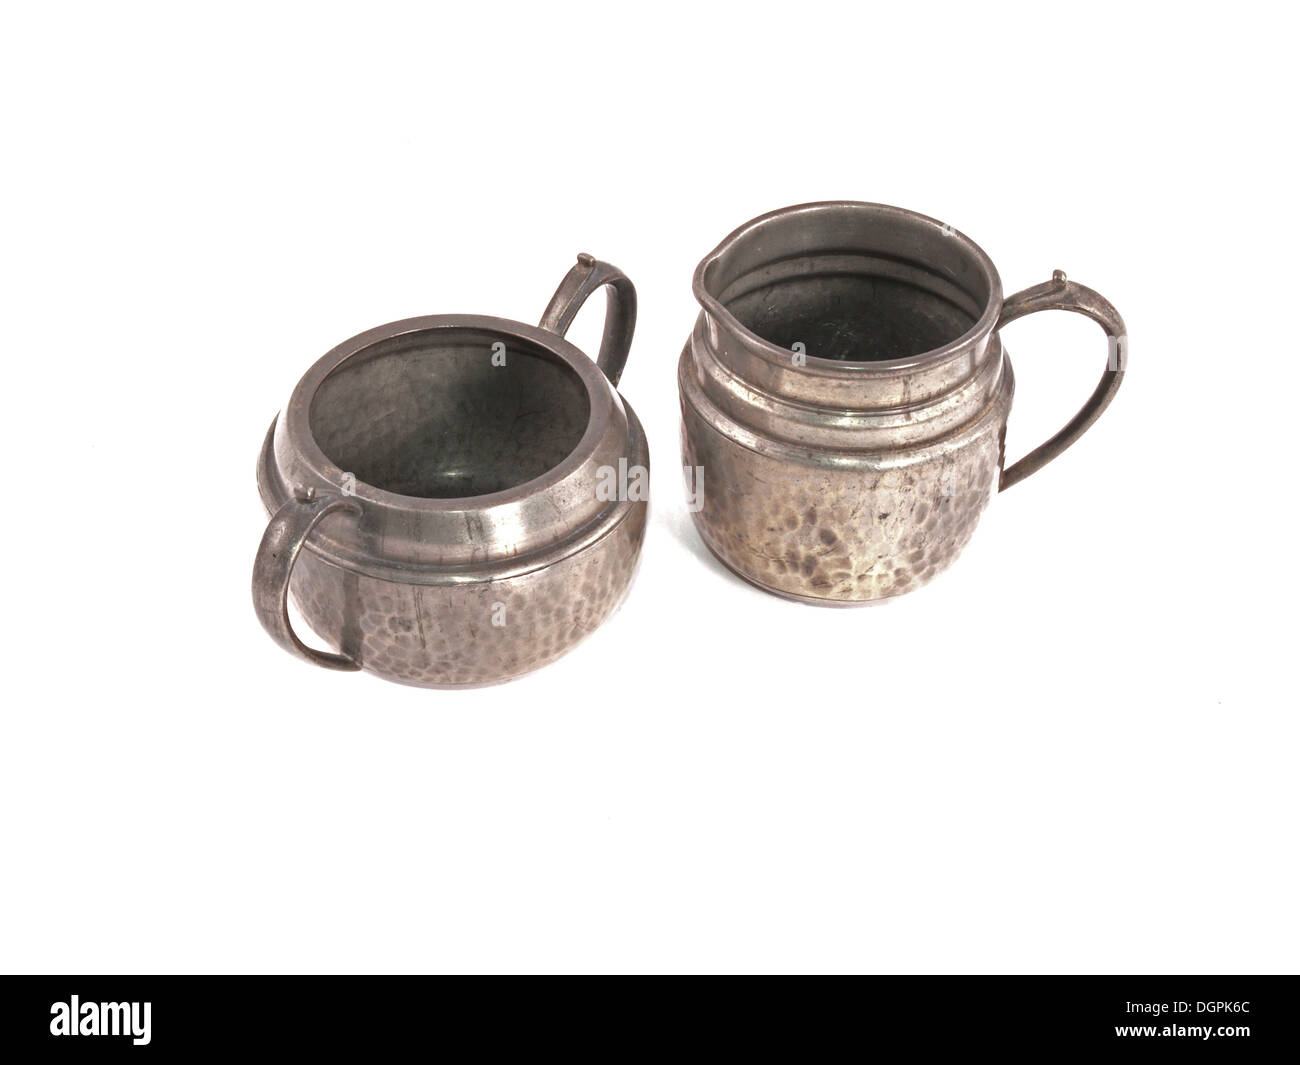 Pewter sugar bowl and milk jug on a white background. Stock Photo